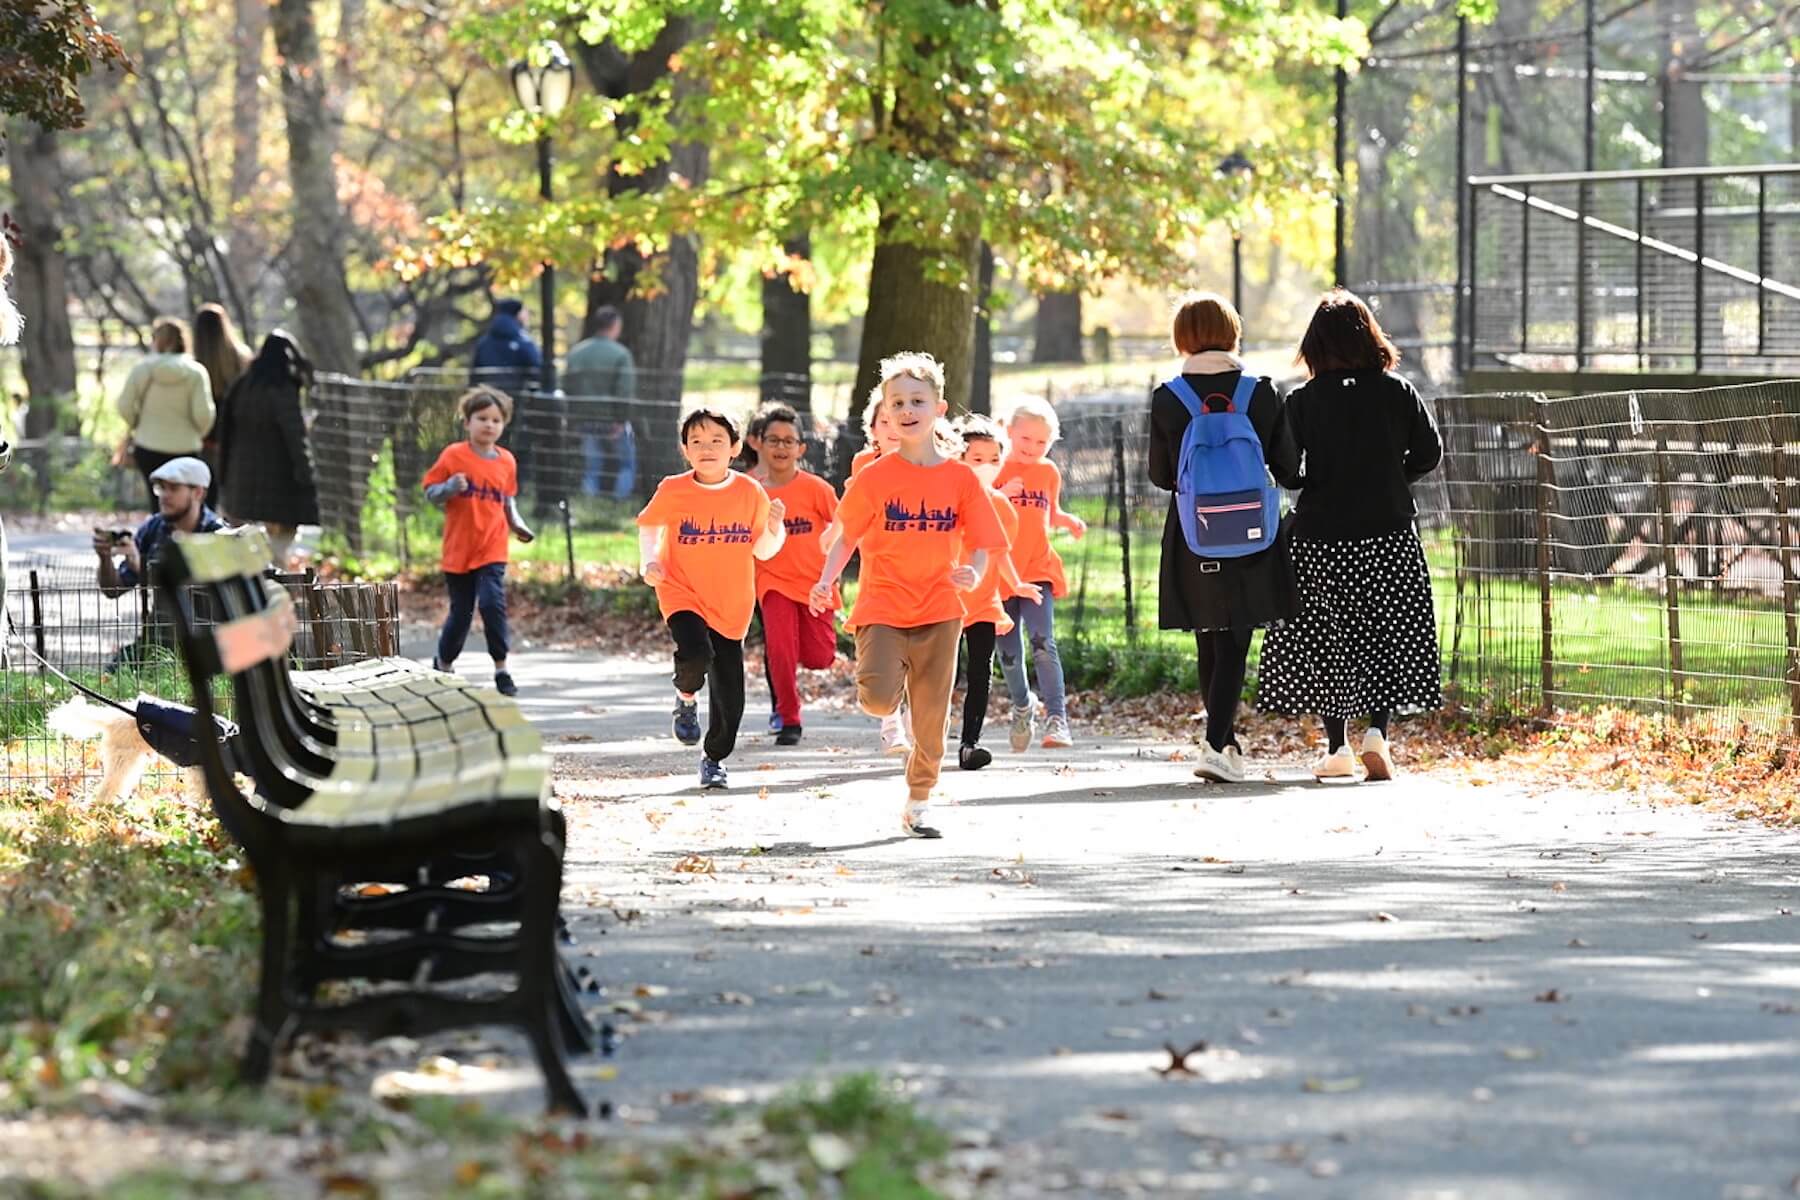 A group of students run together in Central Park wearing orange shirts.